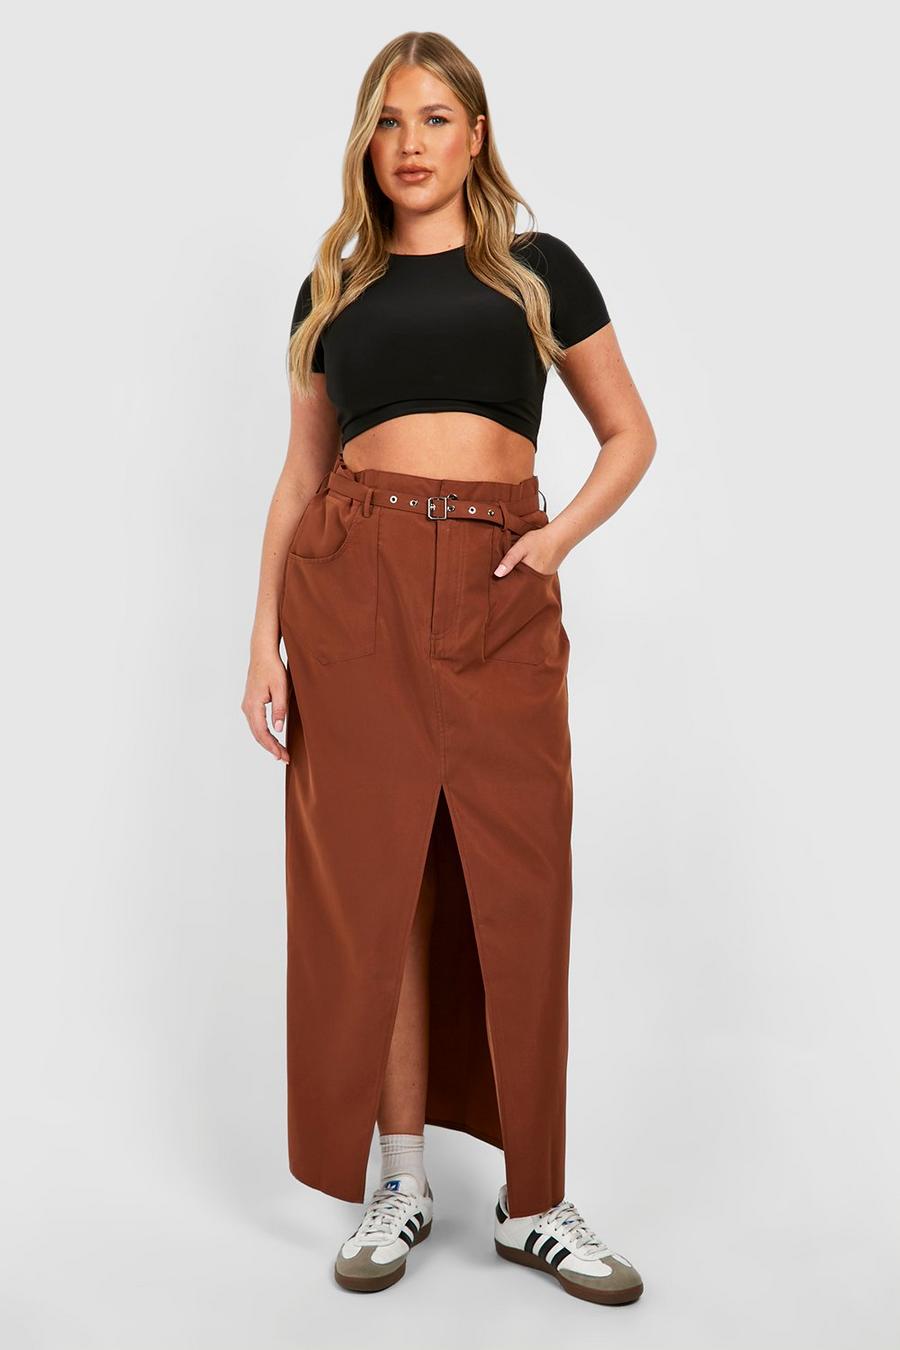 Chocolate Plus Woven Eyelet Belted Maxi Skirt